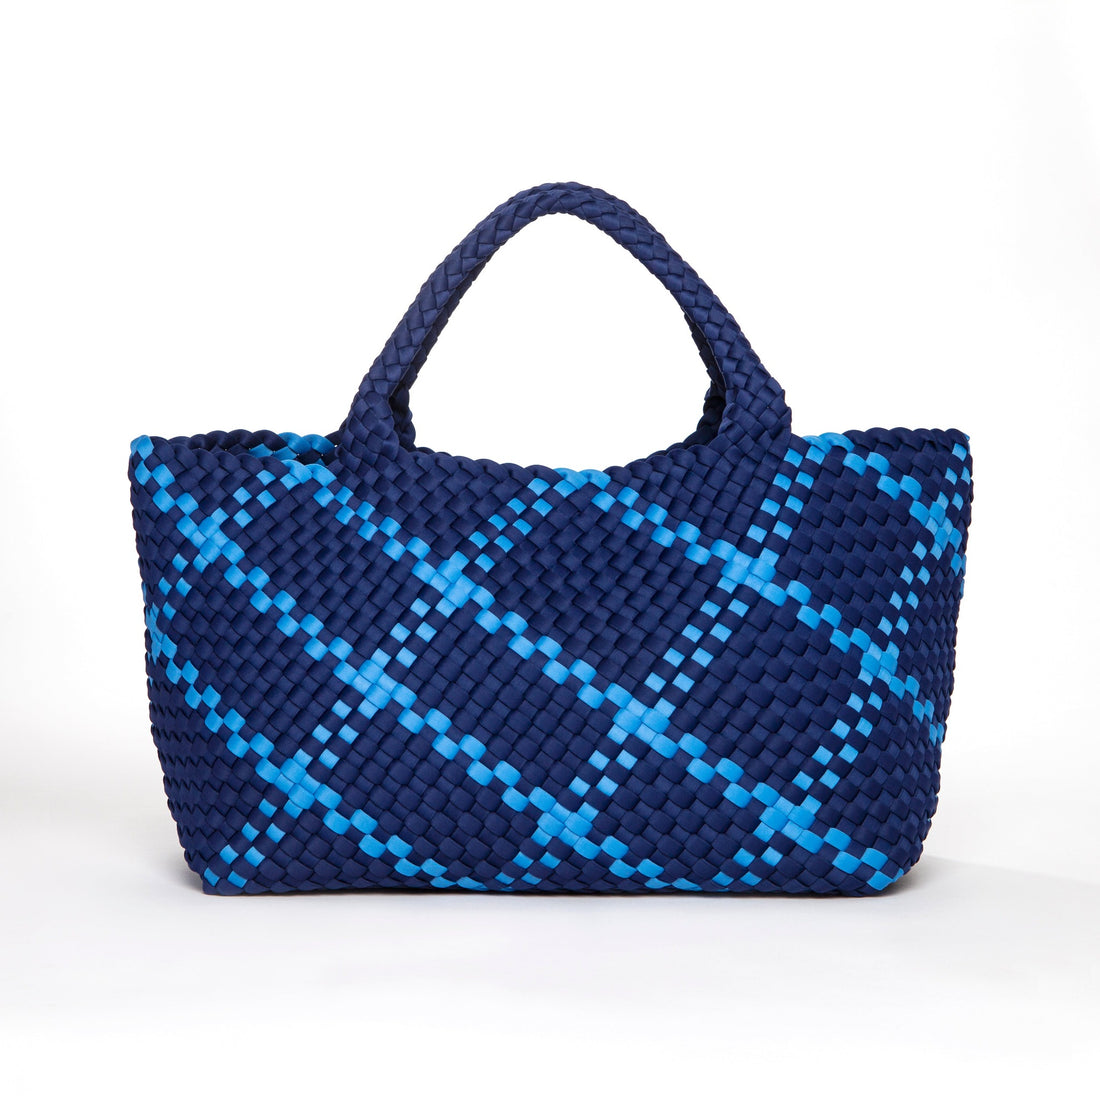 Andreina Bags Ultramarine blue XL Vida Tote Carryall bag Carry-all bag. Perfect Size Carryall bag great for office, travel, new mums, luggage. Comes with detached clutch for phone purse.